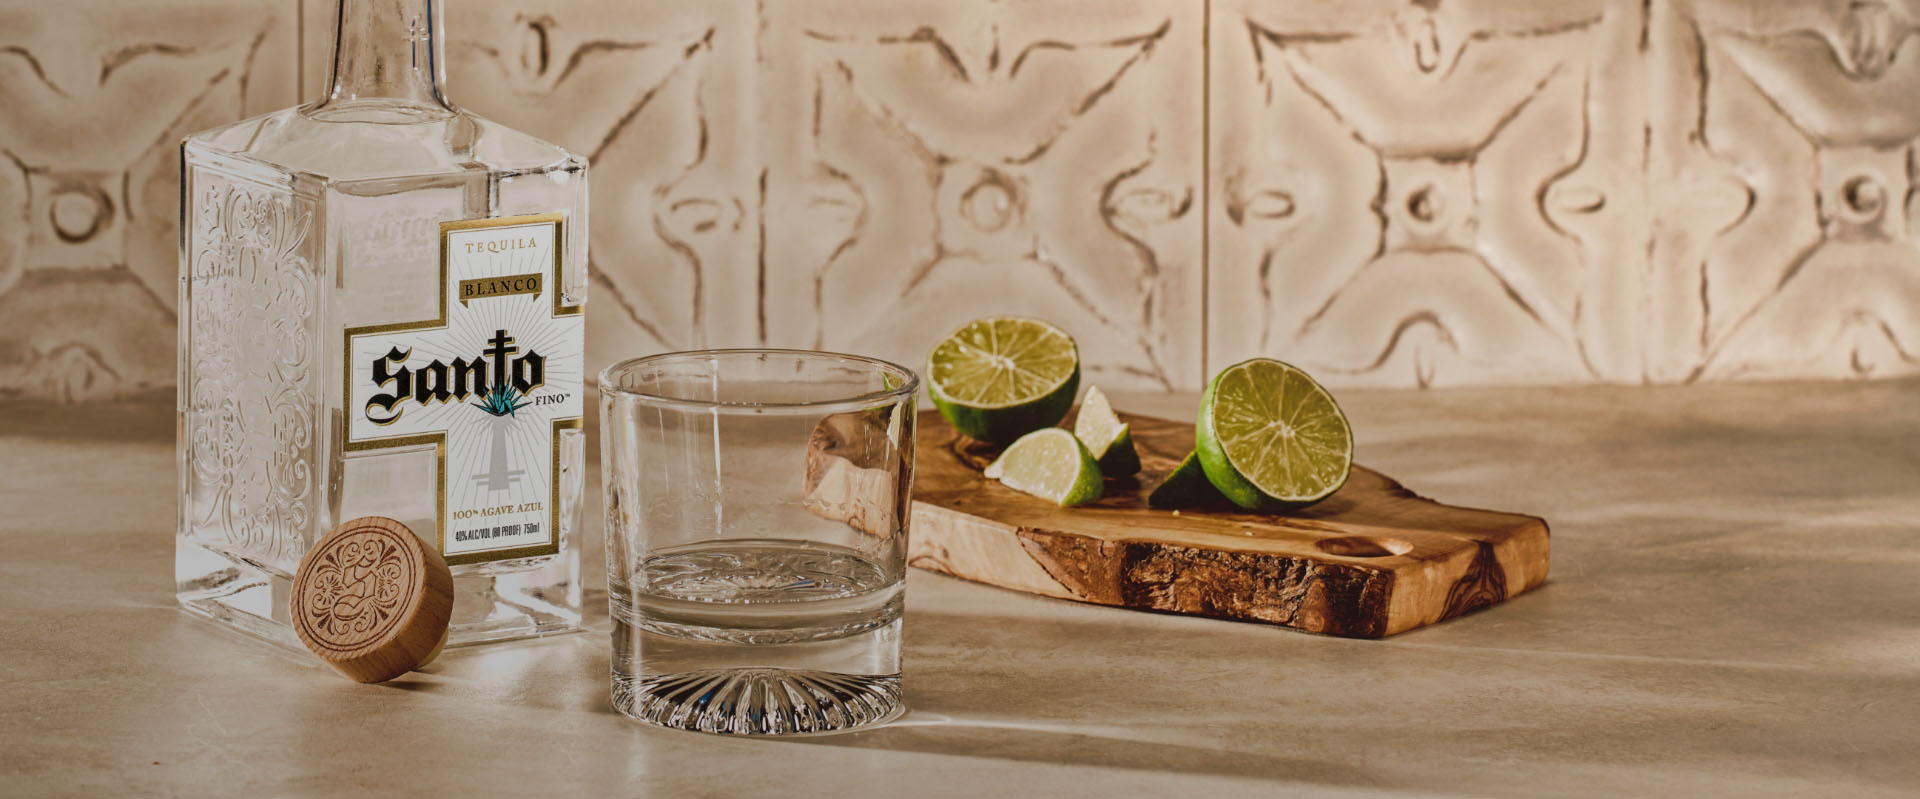 A bottle of Santo Blanco tequila on counter next to cut limes on a cutting board and a glass tumbler.